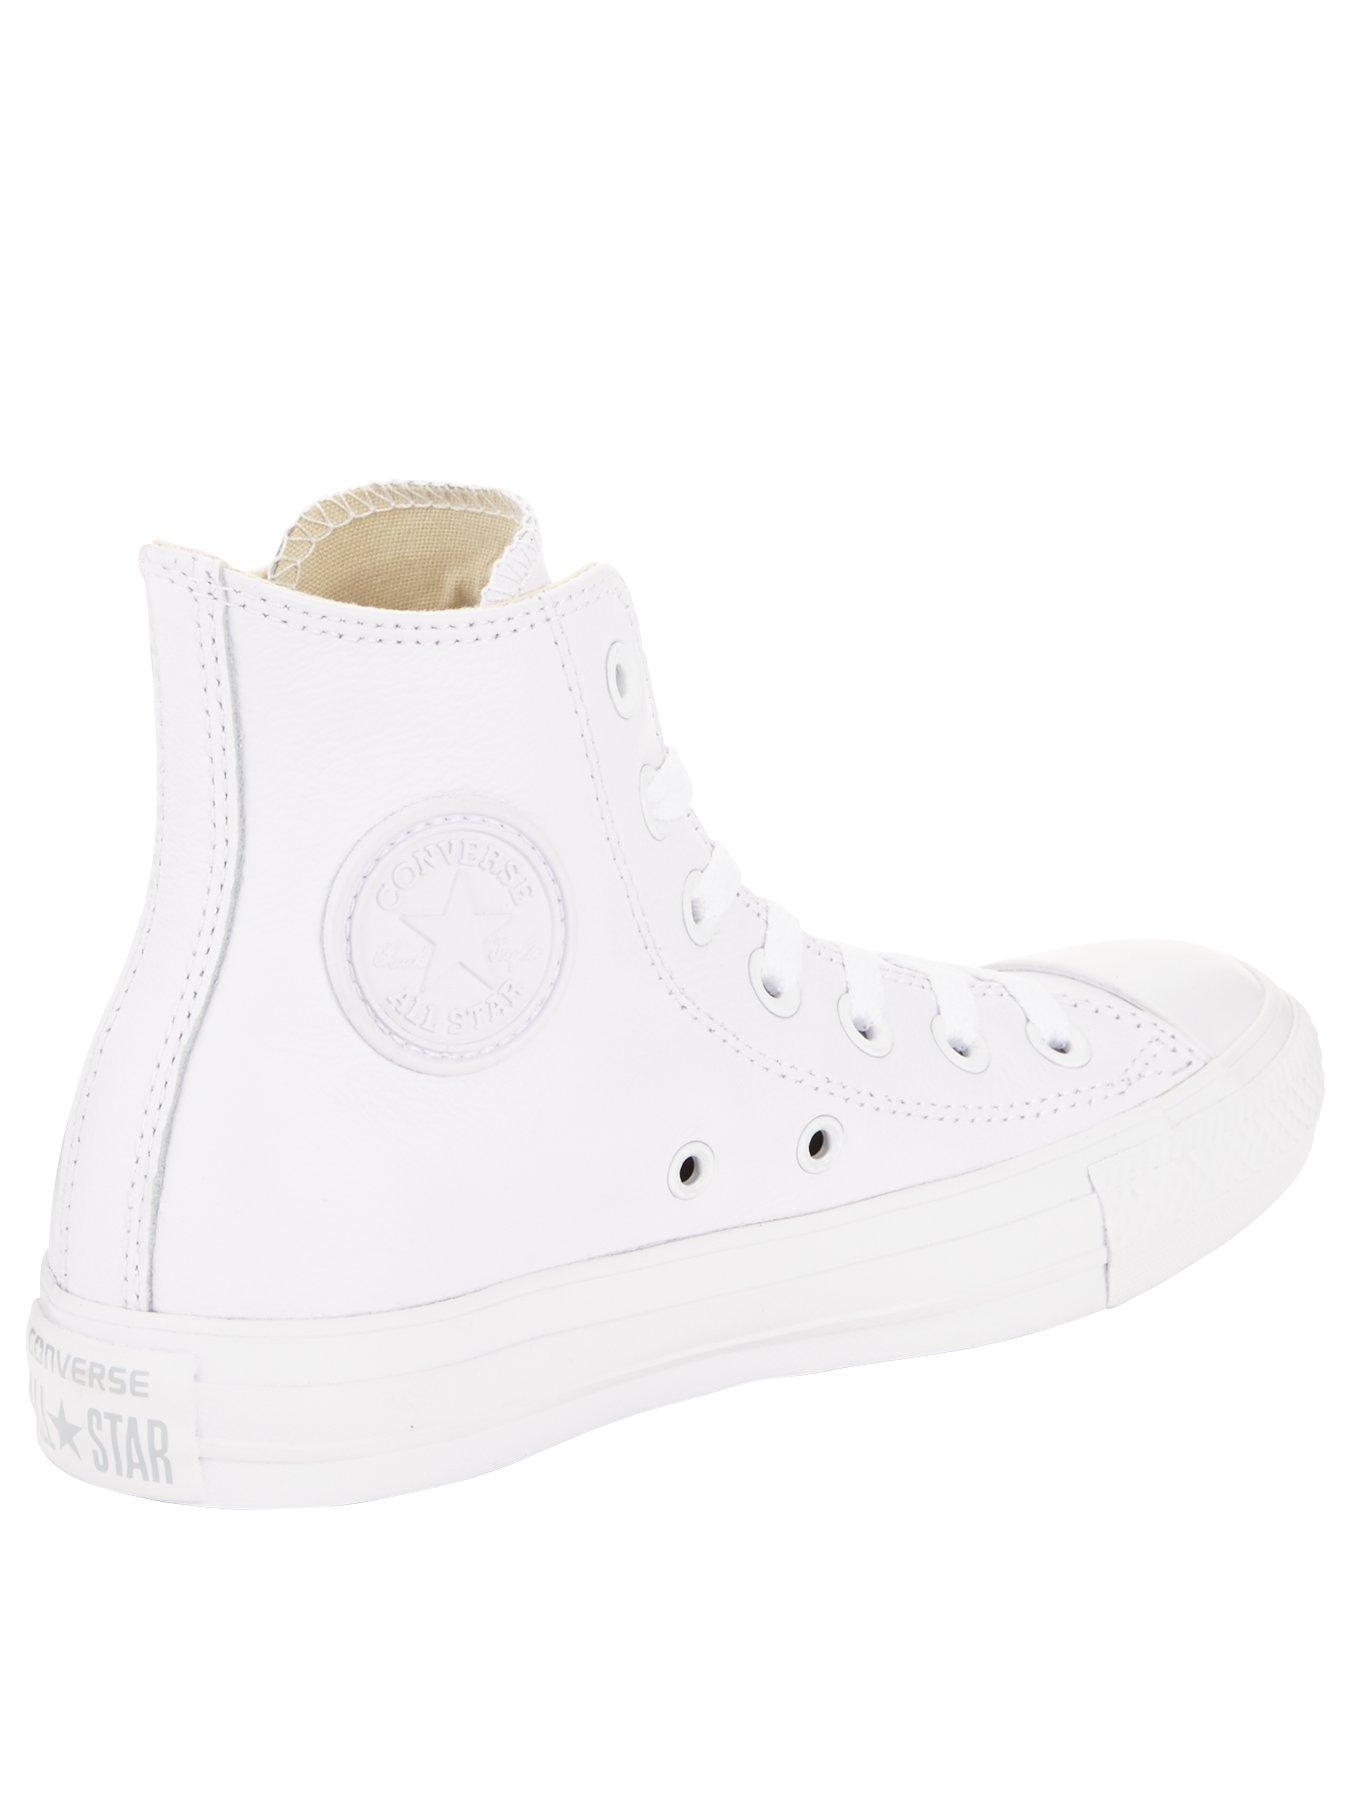 Converse Chuck Taylor All Star Leather Hi-Tops | very.co.uk